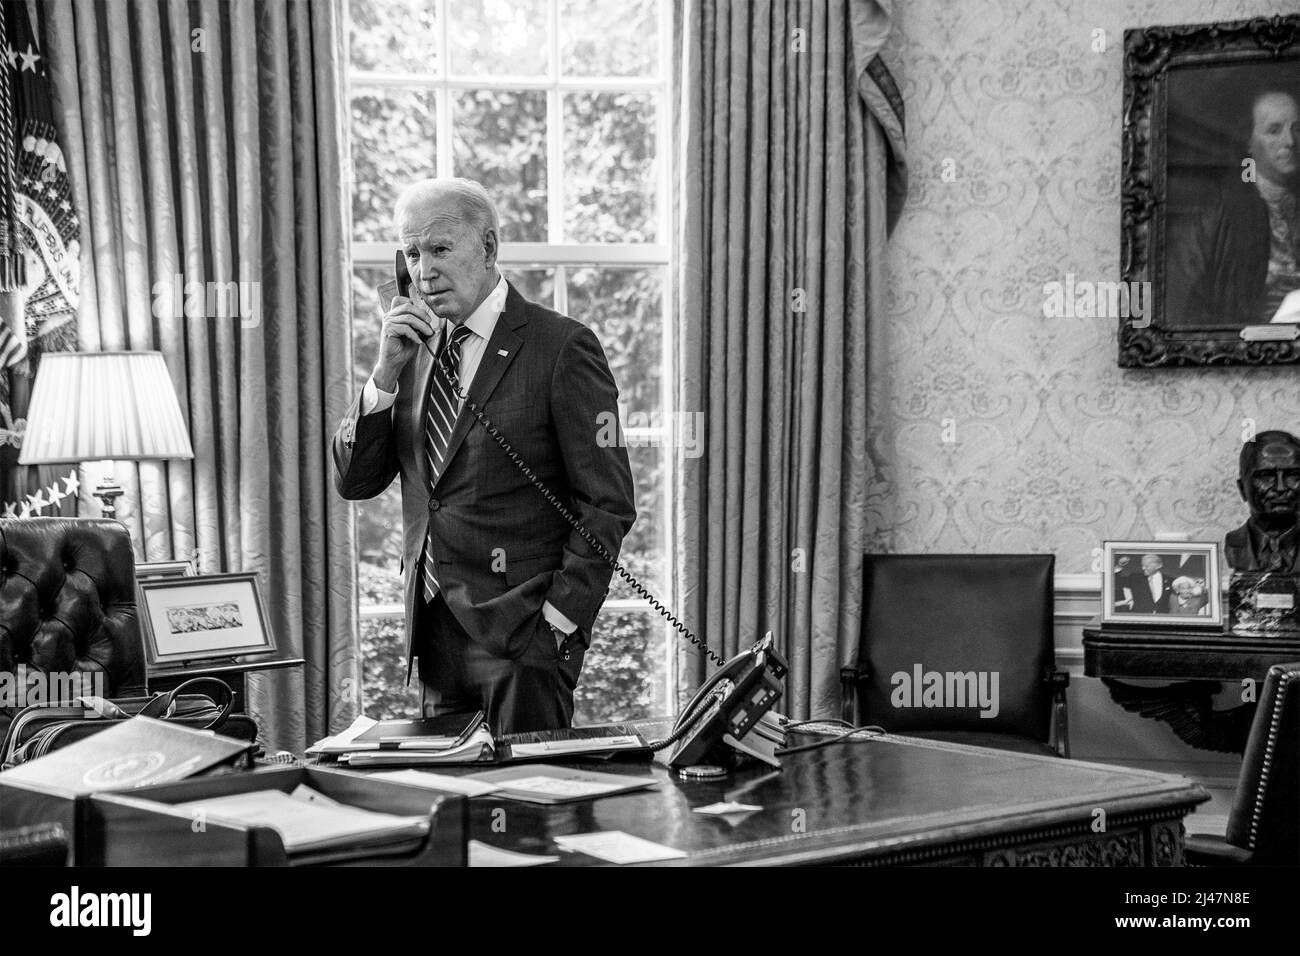 Washington, United States of America. 28 January, 2021. U.S President Joe Biden speaks by phone to Pittsburgh Mayor Ed Gainey about the bridge collapse hours before the presidents scheduled visit from the Oval Office of the White House, January 28, 2022 in Washington, D.C.  Credit: Erin Scott/White House Photo/Alamy Live News Stock Photo